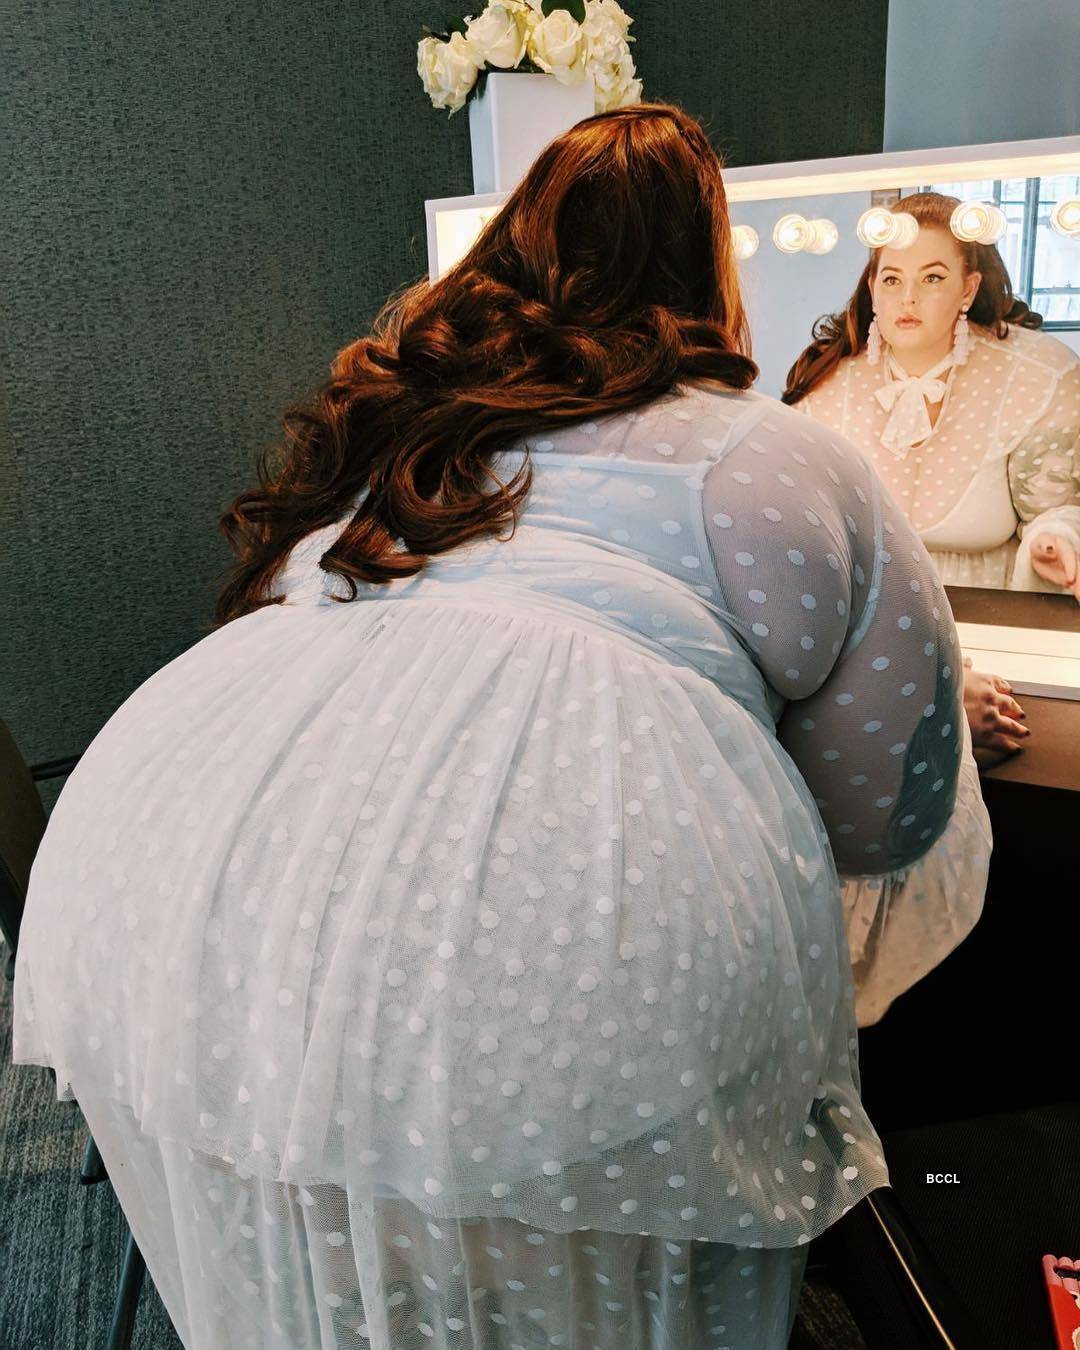 Author of 'Fat Girl' Tess Holliday changes the perception of plus size models